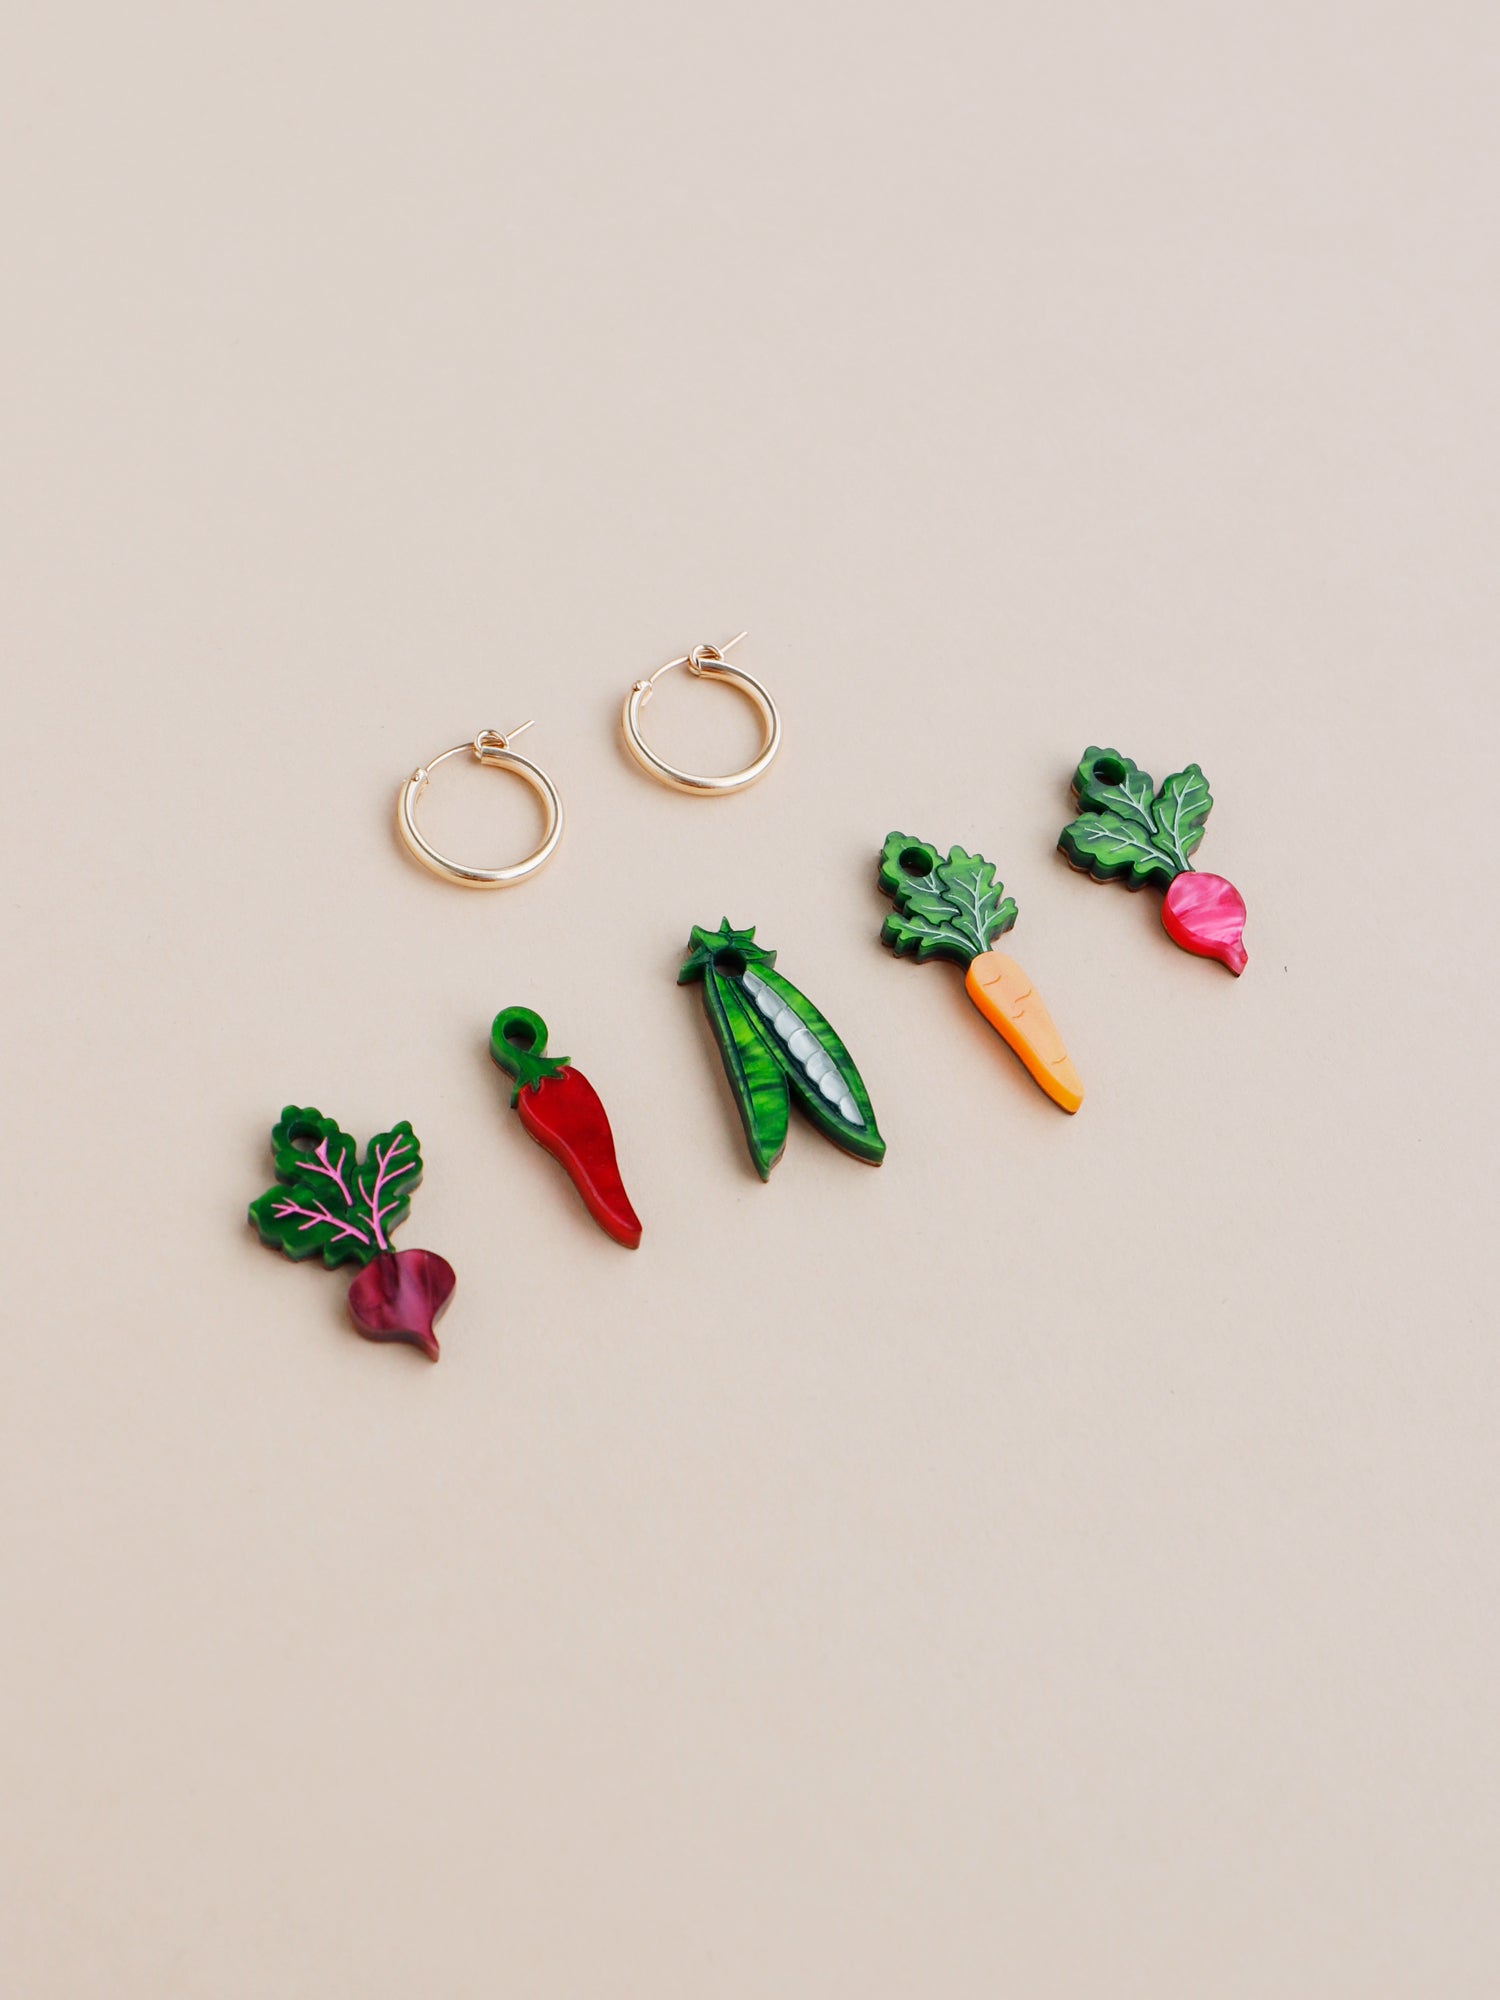 Our Five A Day set includes 1x Radish charm, 1 x Chilli Pepper charm , 1 x Carrot charm , 1 x Peas in a Pod charm, 1 x Beetroot charm. Charms that can be purchased with our gold-filled hoops. Handmade in London by Wolf & Moon.